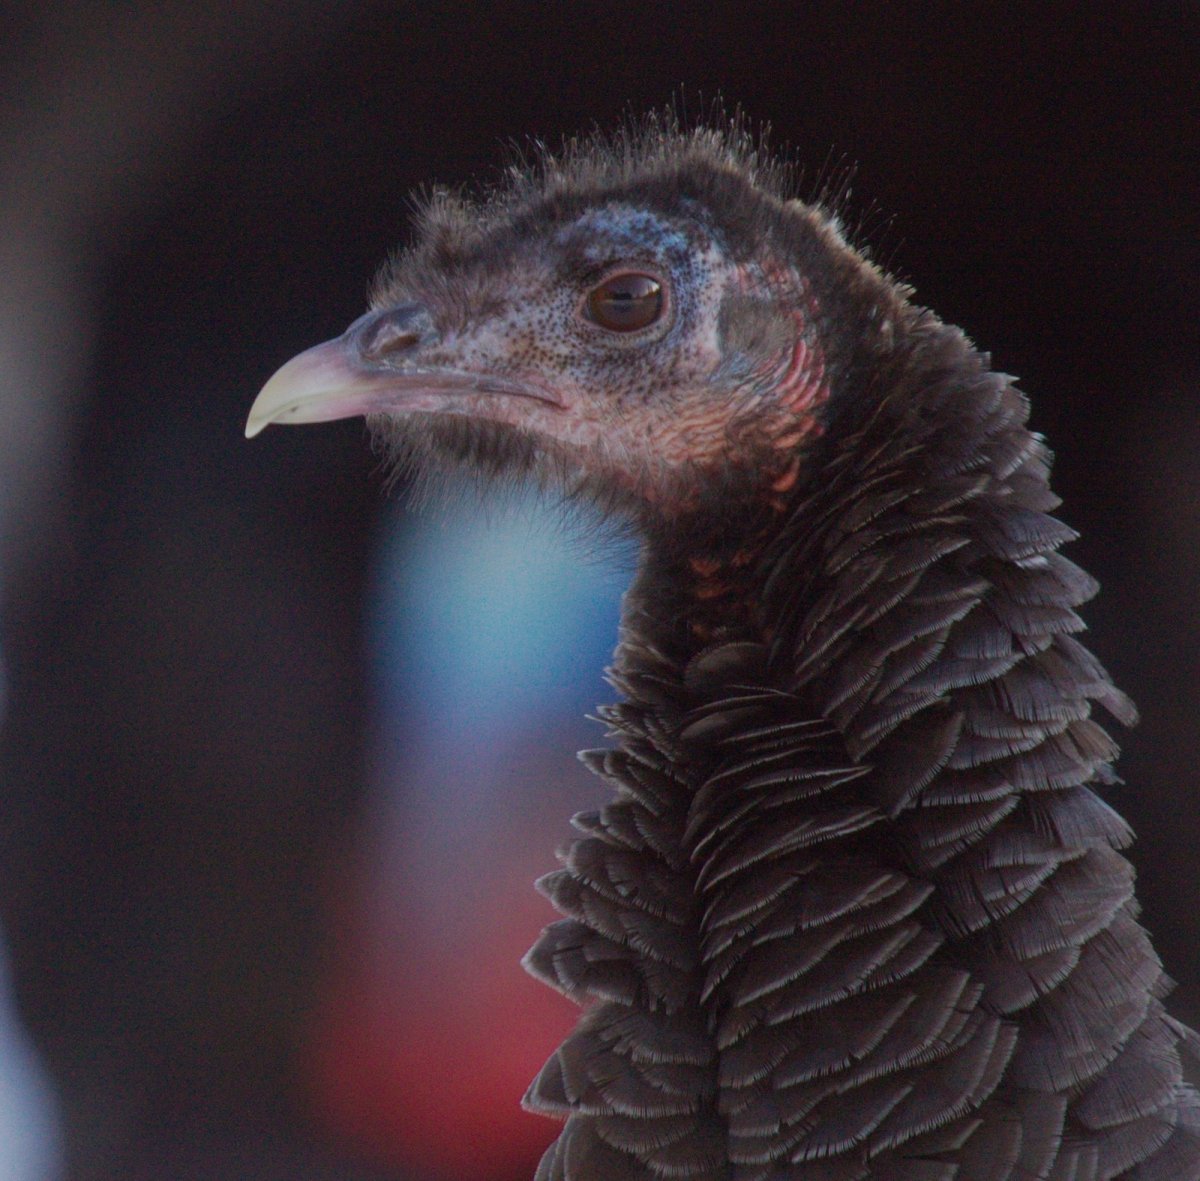 178 turkeys have been translocated from B.C. to rural Alberta by the Alberta Conservation Association so far this year. 